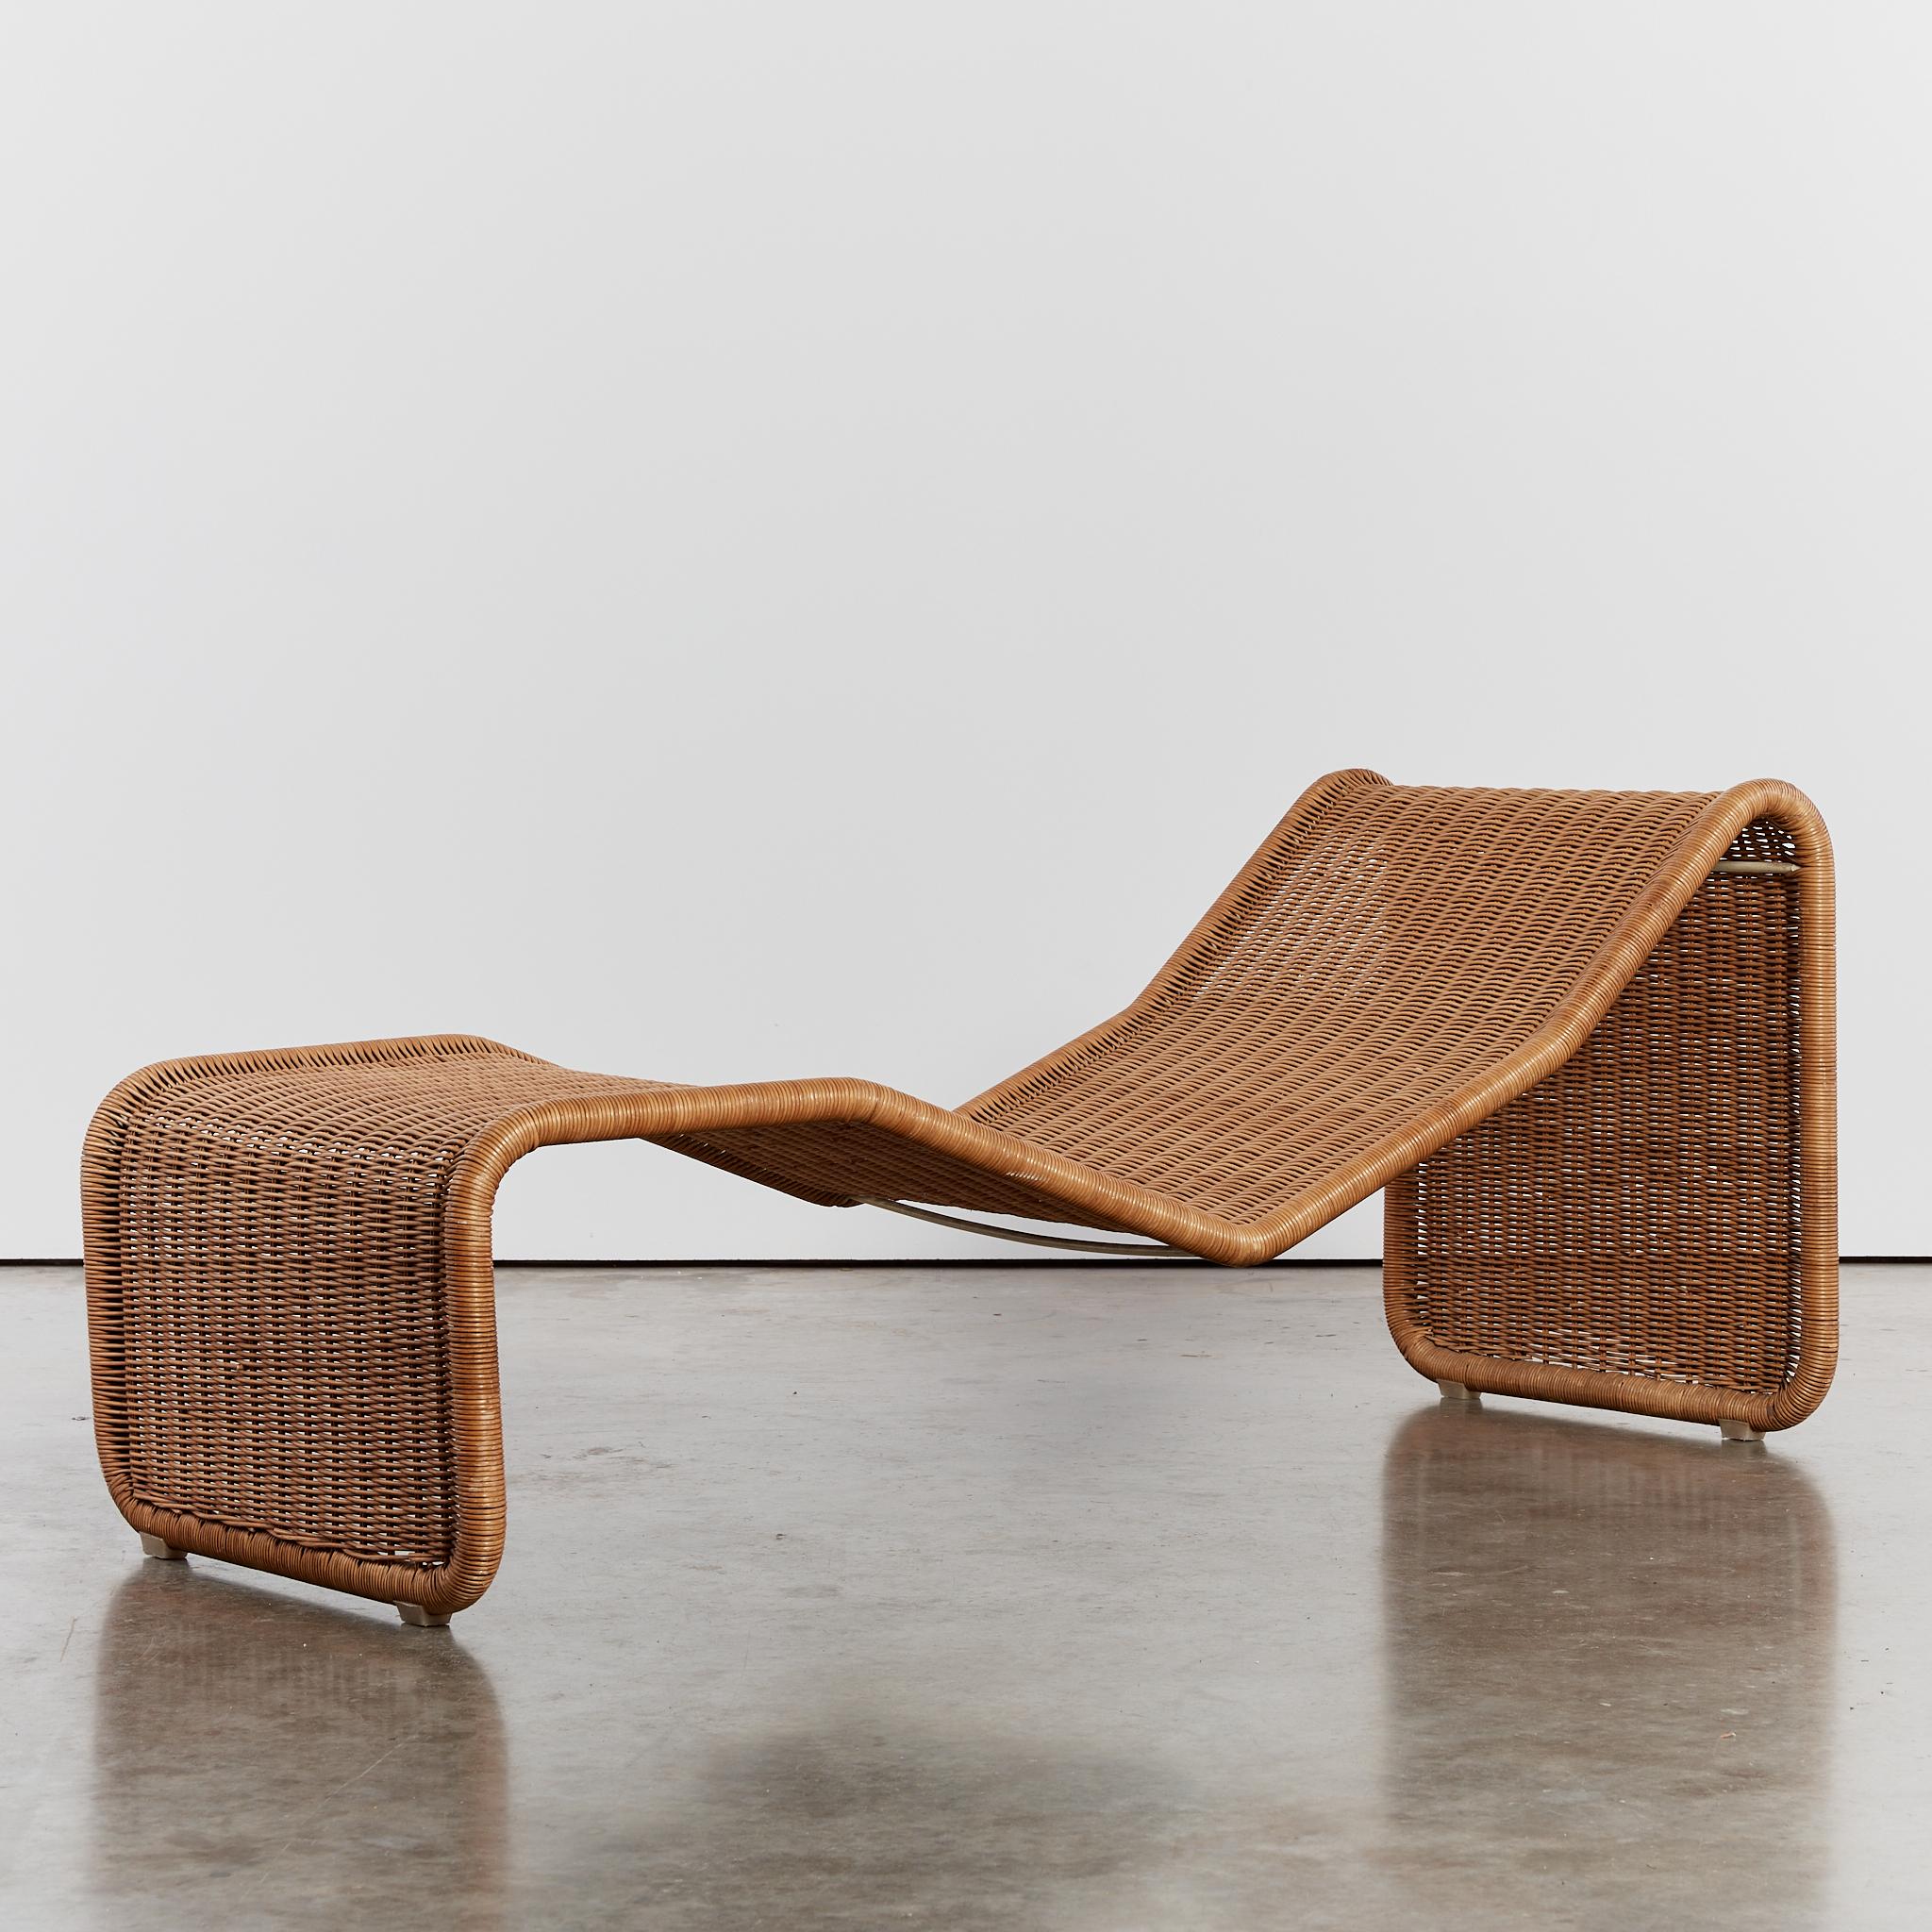 Rare rattan P3 chaise lounge by Italian designer Tito Agnoli for Bonacina. This piece is in excellent condition for it's age, with the rattan retaining the warm tan hues and no breakages.

Designer: Tito Agnoli

Model: P3

Year: 1962

Material: